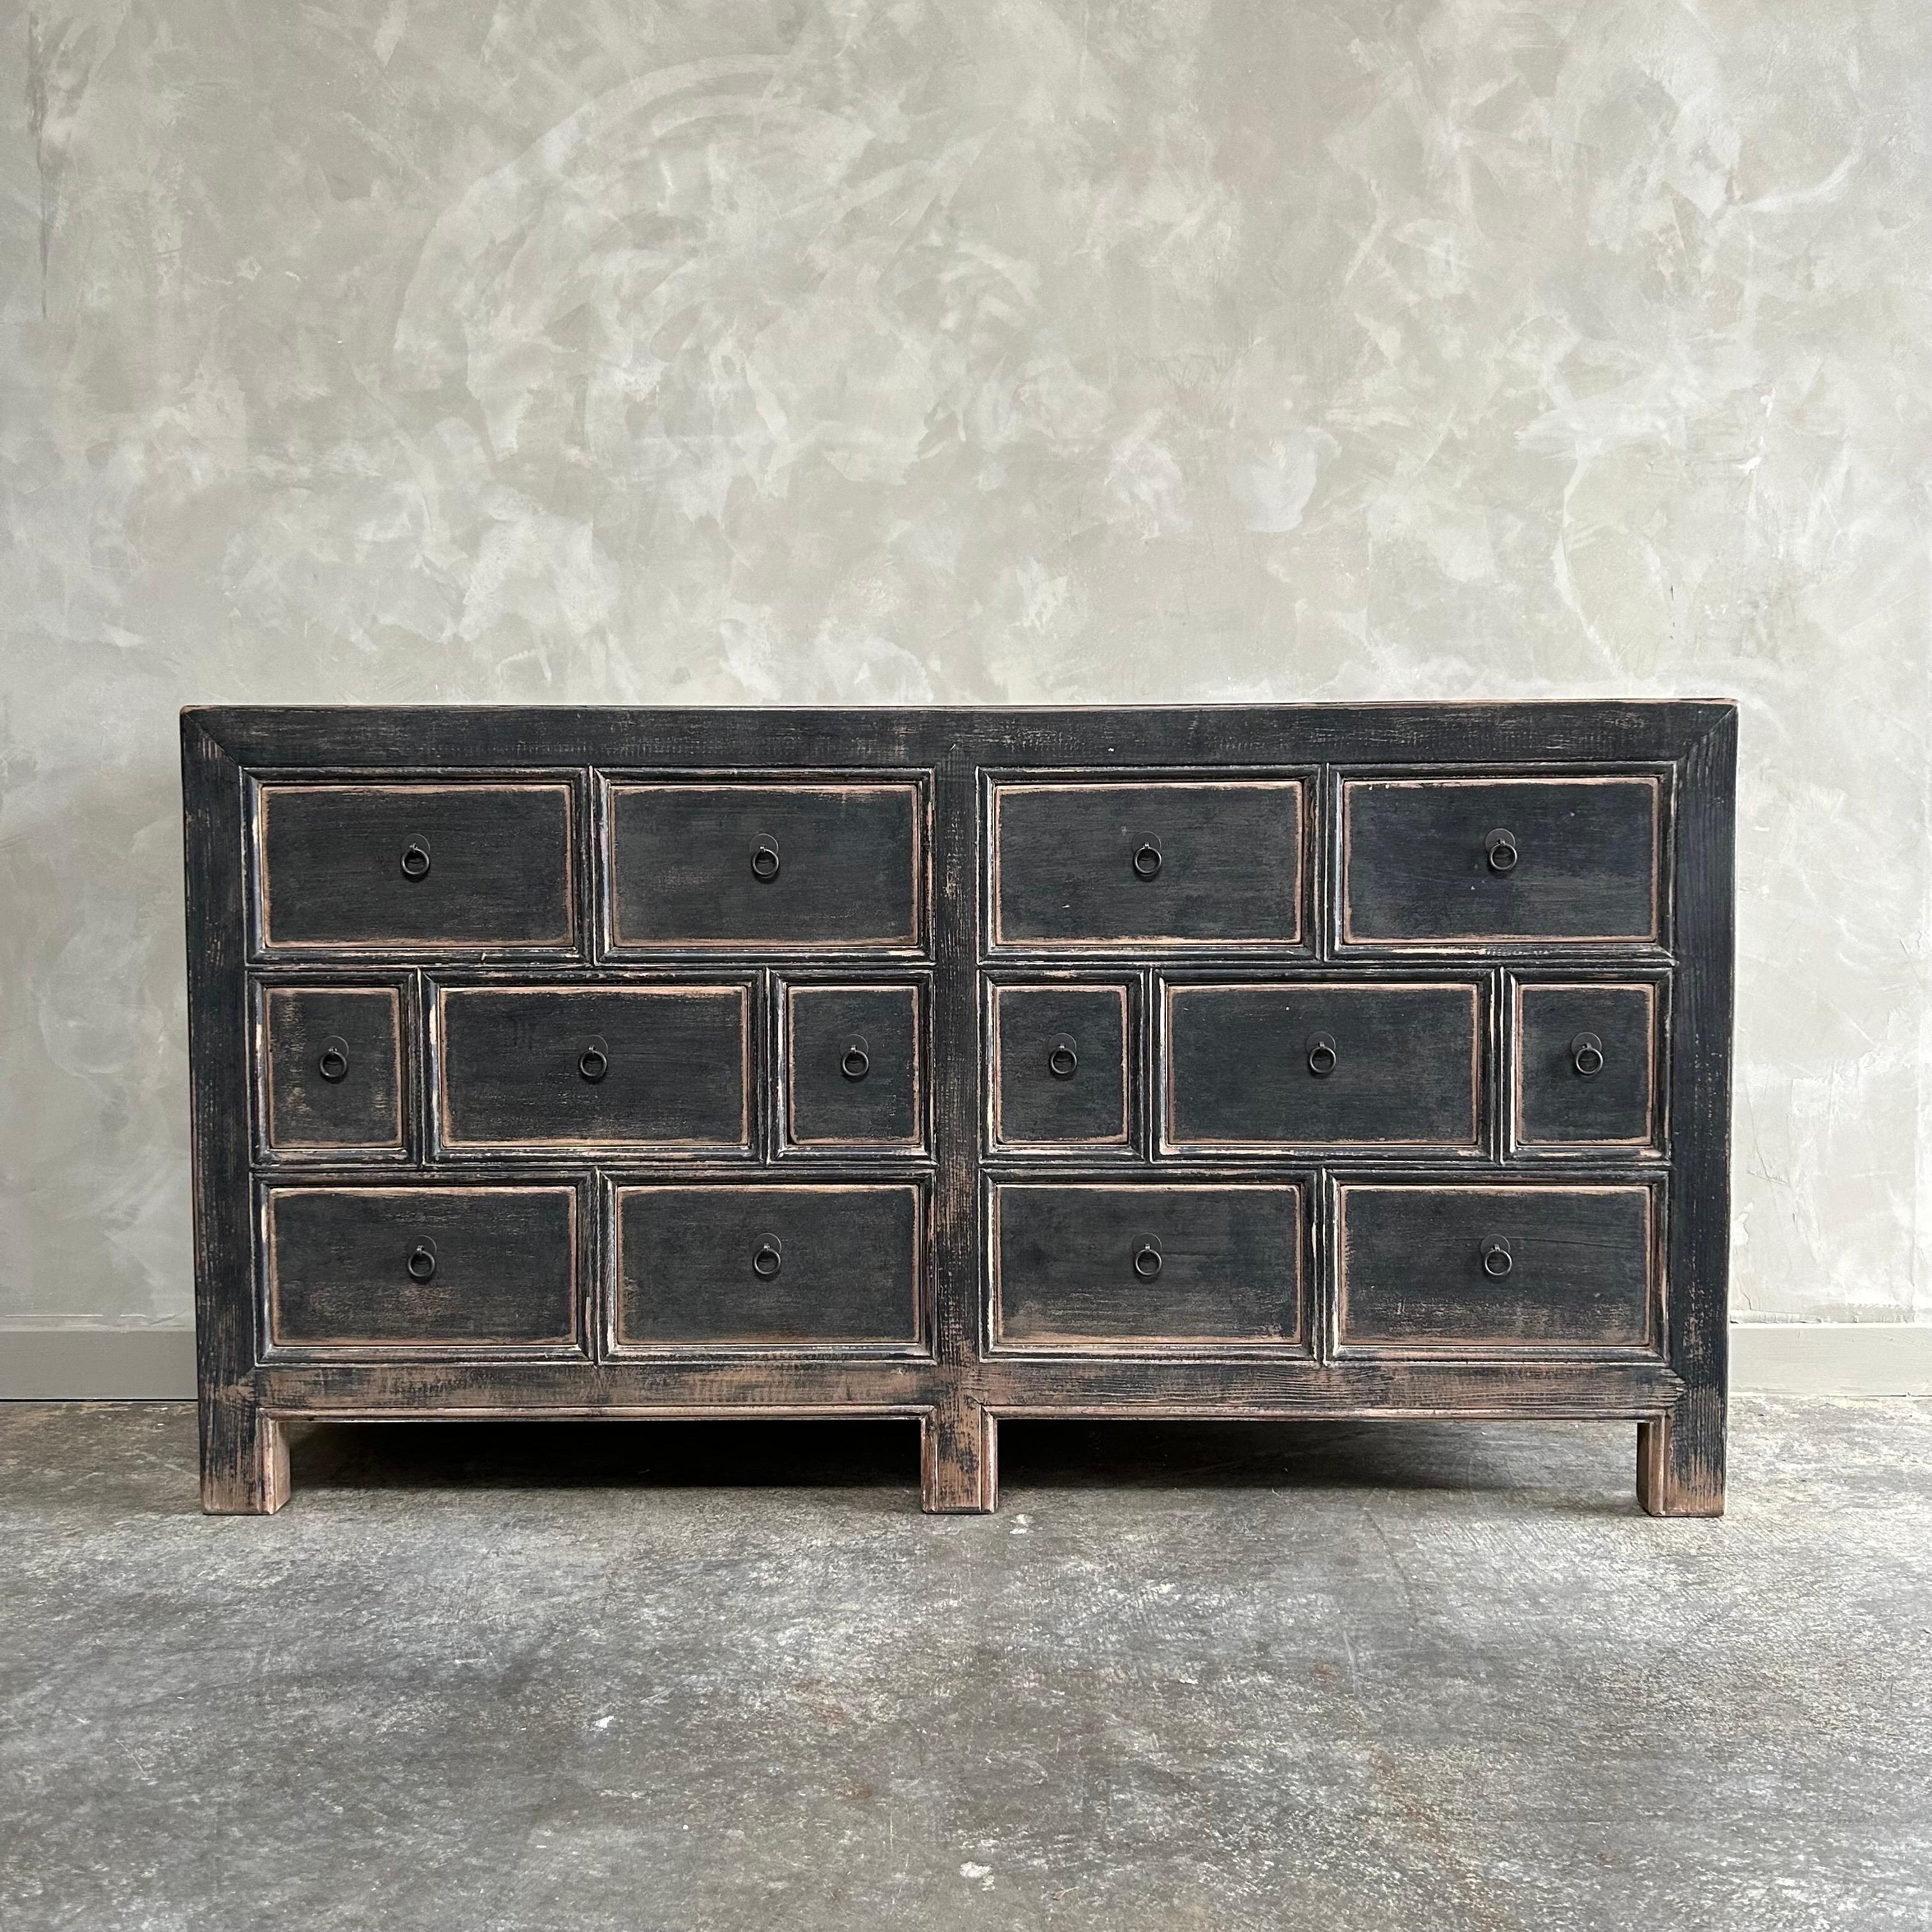 To see more of our collection scroll down and select view all from seller, over 2000 items in stock ready to ship!

14 Drawer Chest made by bloom home inc. 
SIZE: 63”w x 17”d x 33-1/2”h
These old reclaimed pine timbers show in its most primal,